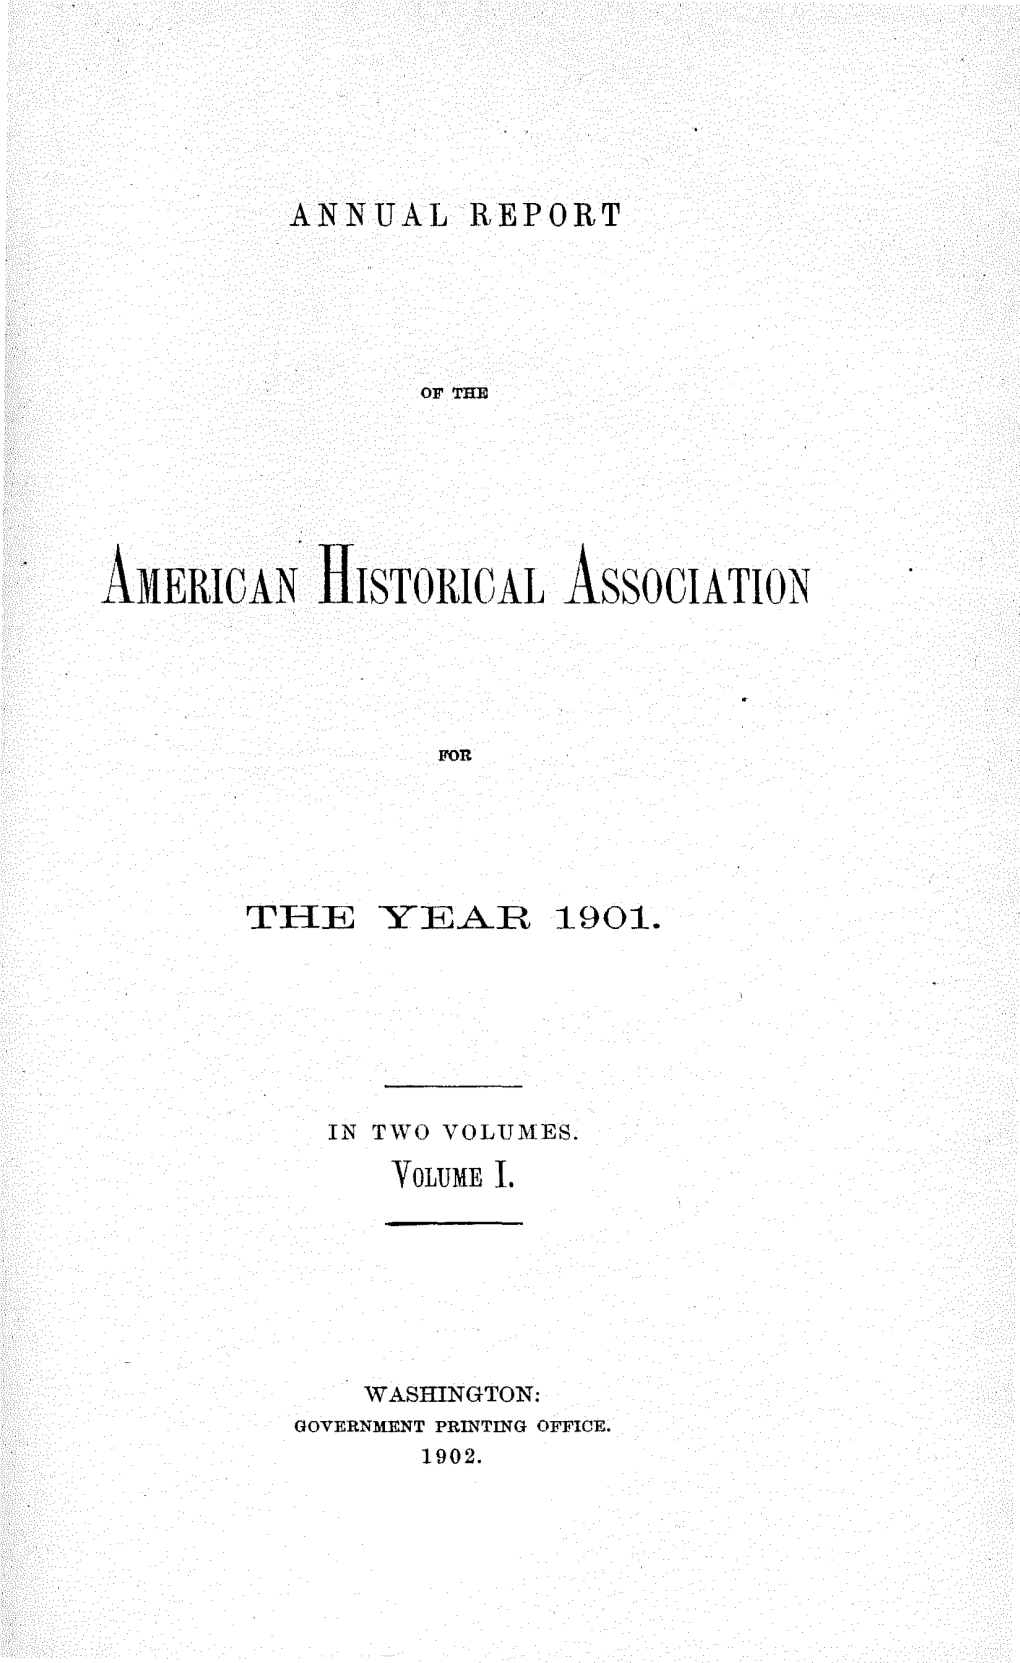 American Historical Association, Approved January 4, 1889, I Have the Honor to Submit to Congress the Annual Report of That Associa­ Tion for the Year 1901